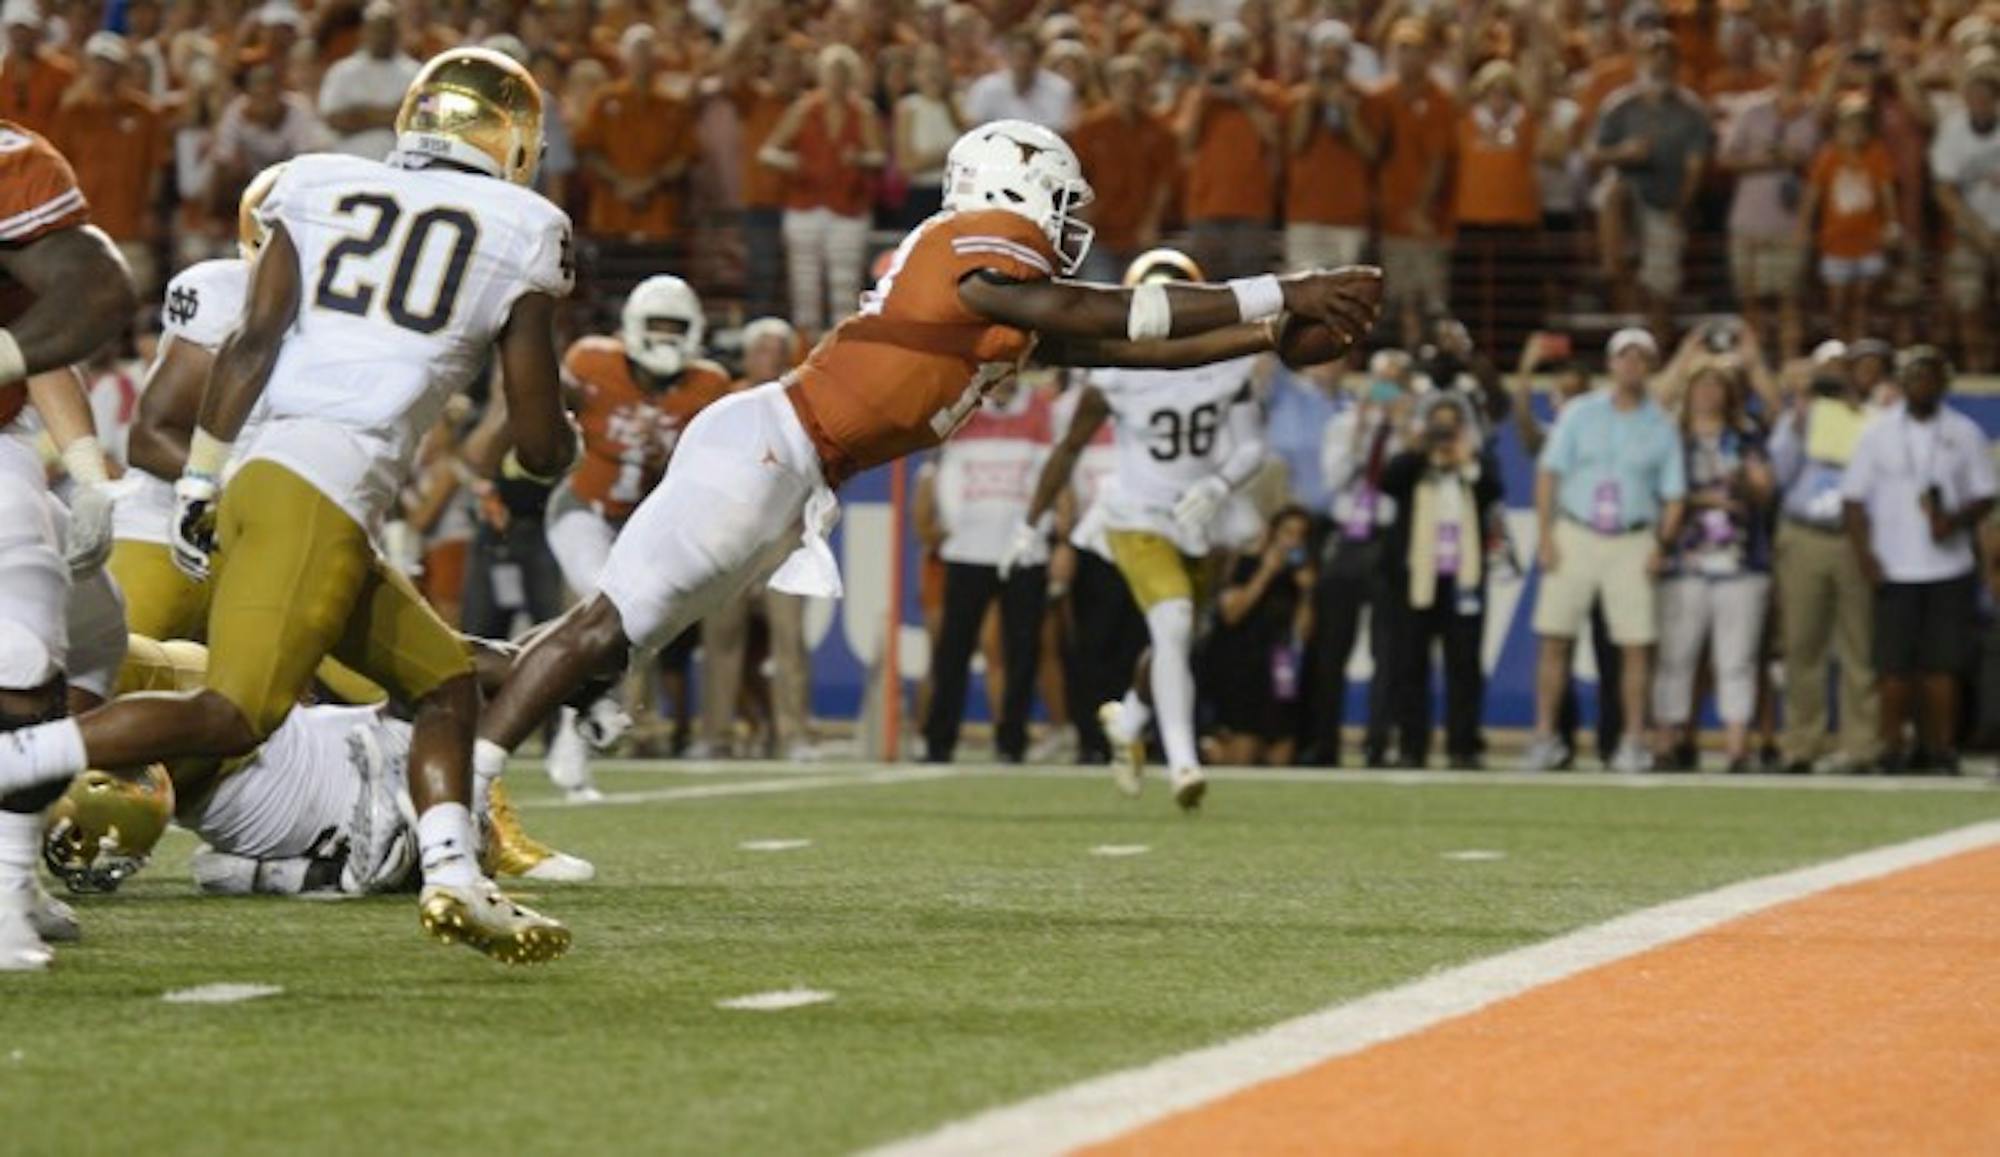 Longhorns senior quarterback Tyrone Swoopes dives into the end zone to secure Texas a 50-47 victory over Notre Dame at Darrell K. Royal-Texas Memorial Stadium on Sunday. Both teams scored touchdowns in the first overtime period before Texas held the Irish to a field goal and scored the winning touchdown in the game’s second overtime.